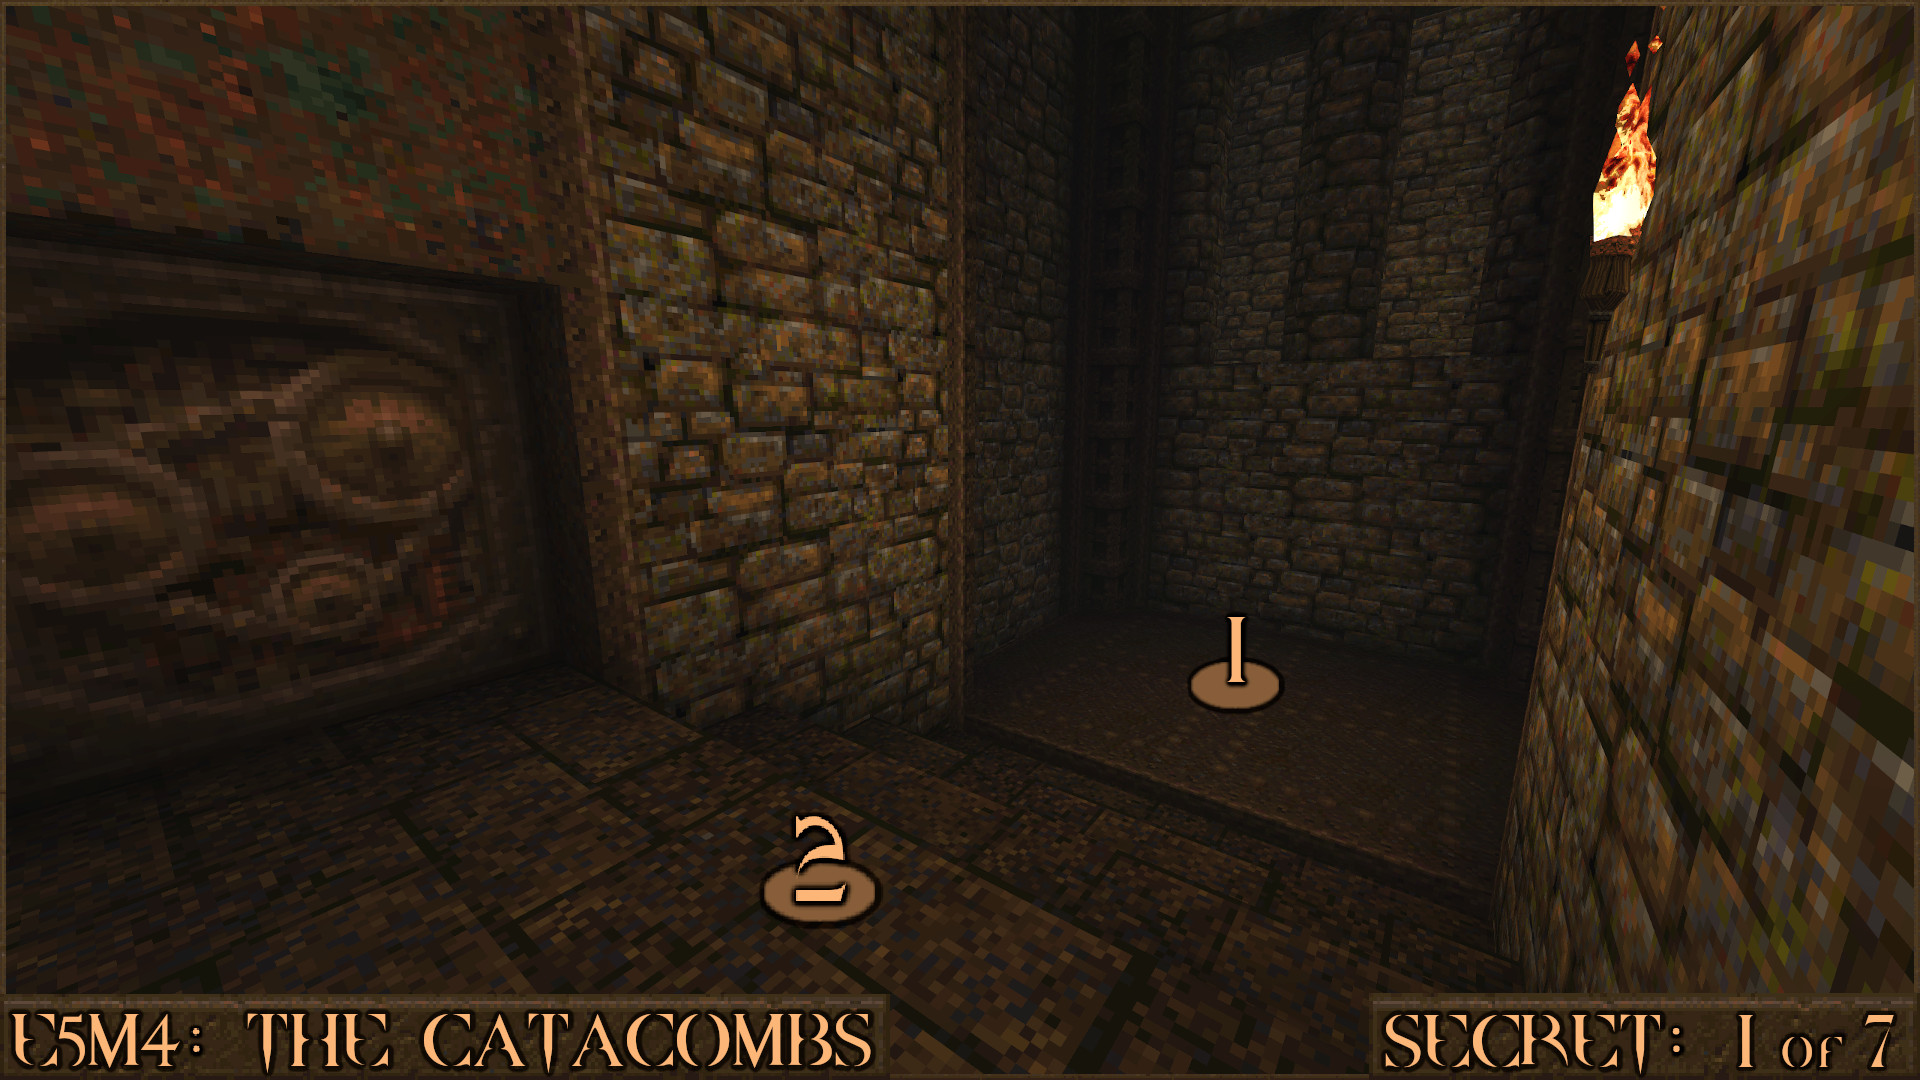 Quake Finding All Secrets in Quake Expansion pack: Dimension of the Past - E5M4: The Catacombs - EBB149A